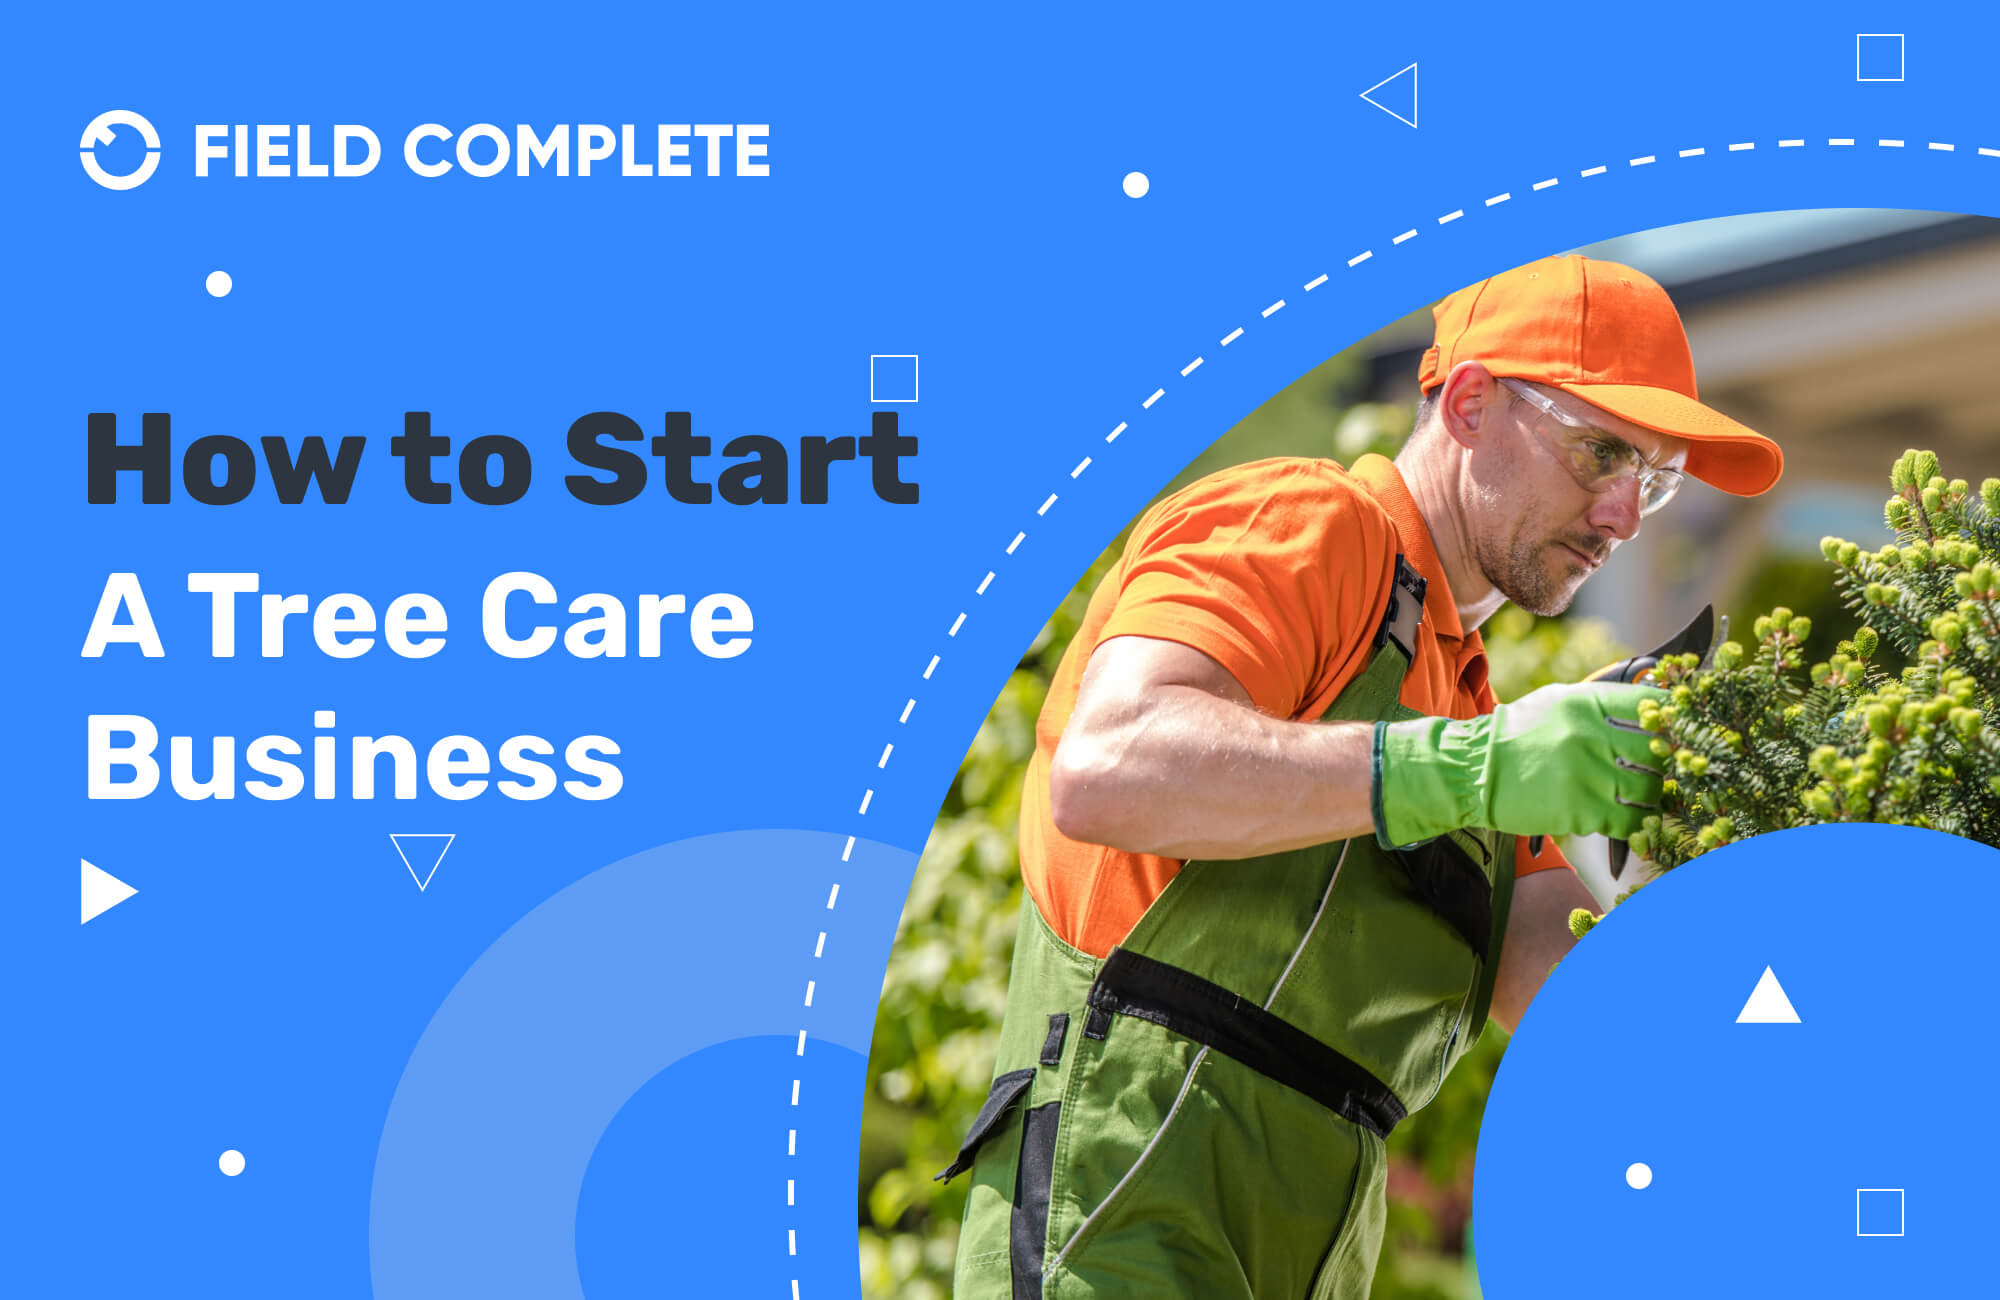 Tree Business. How to Start a Tree Care Business